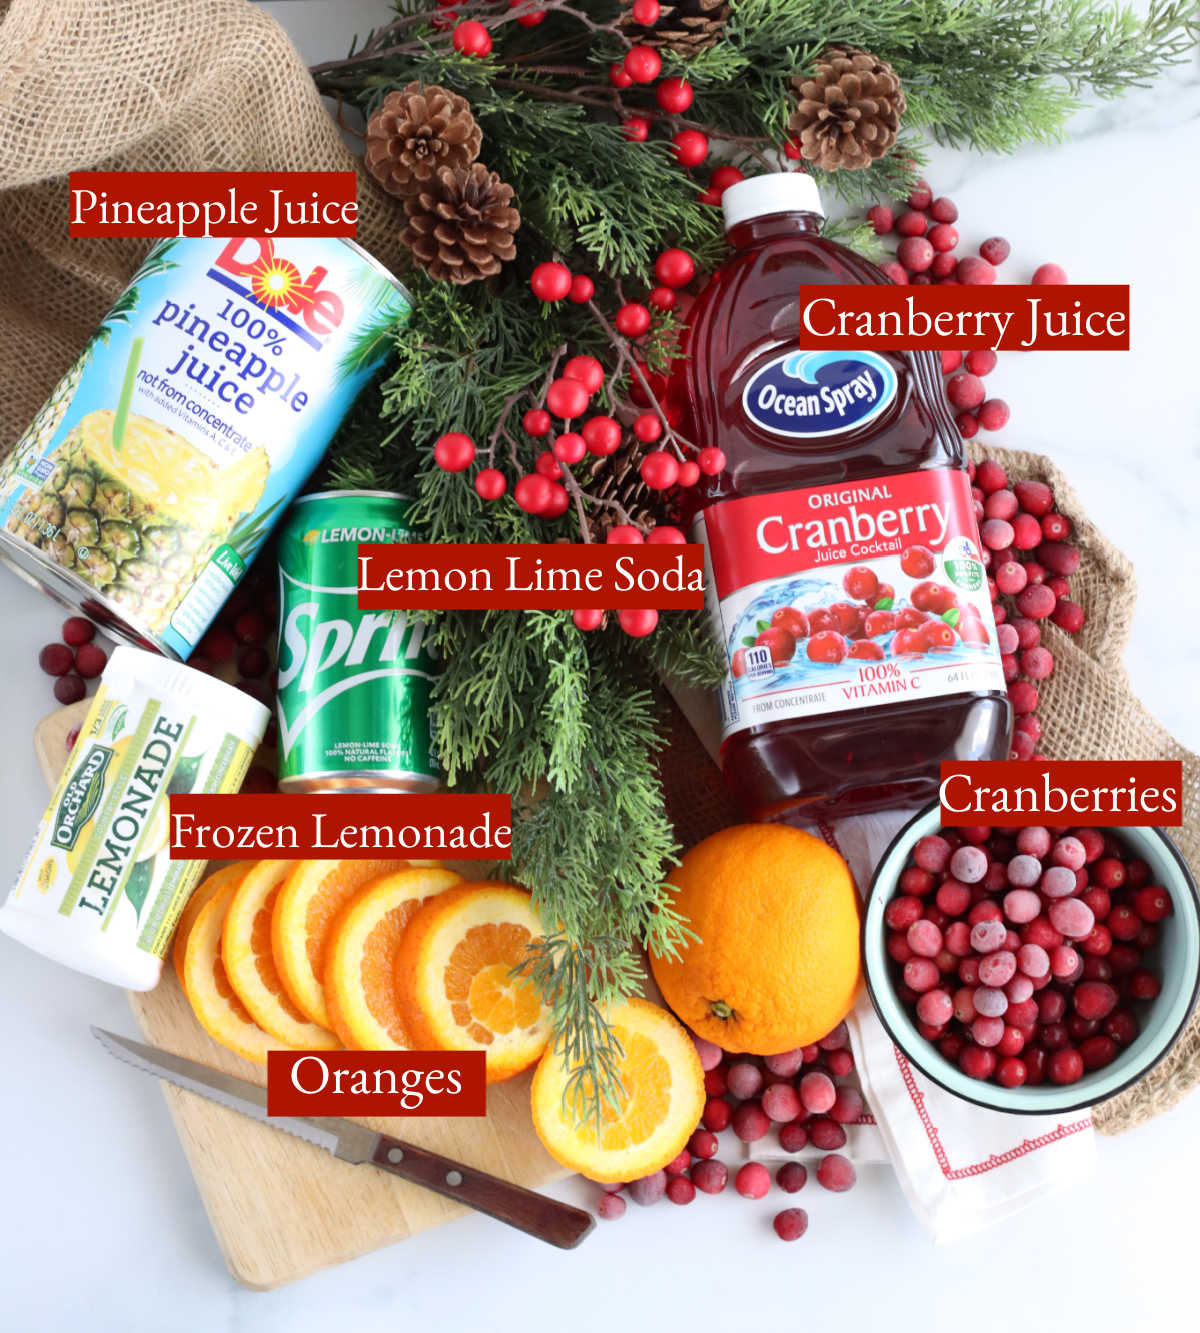 https://afarmgirlskitchen.com/wp-content/uploads/2020/11/Ingredients-for-Holiday-Punch.jpg